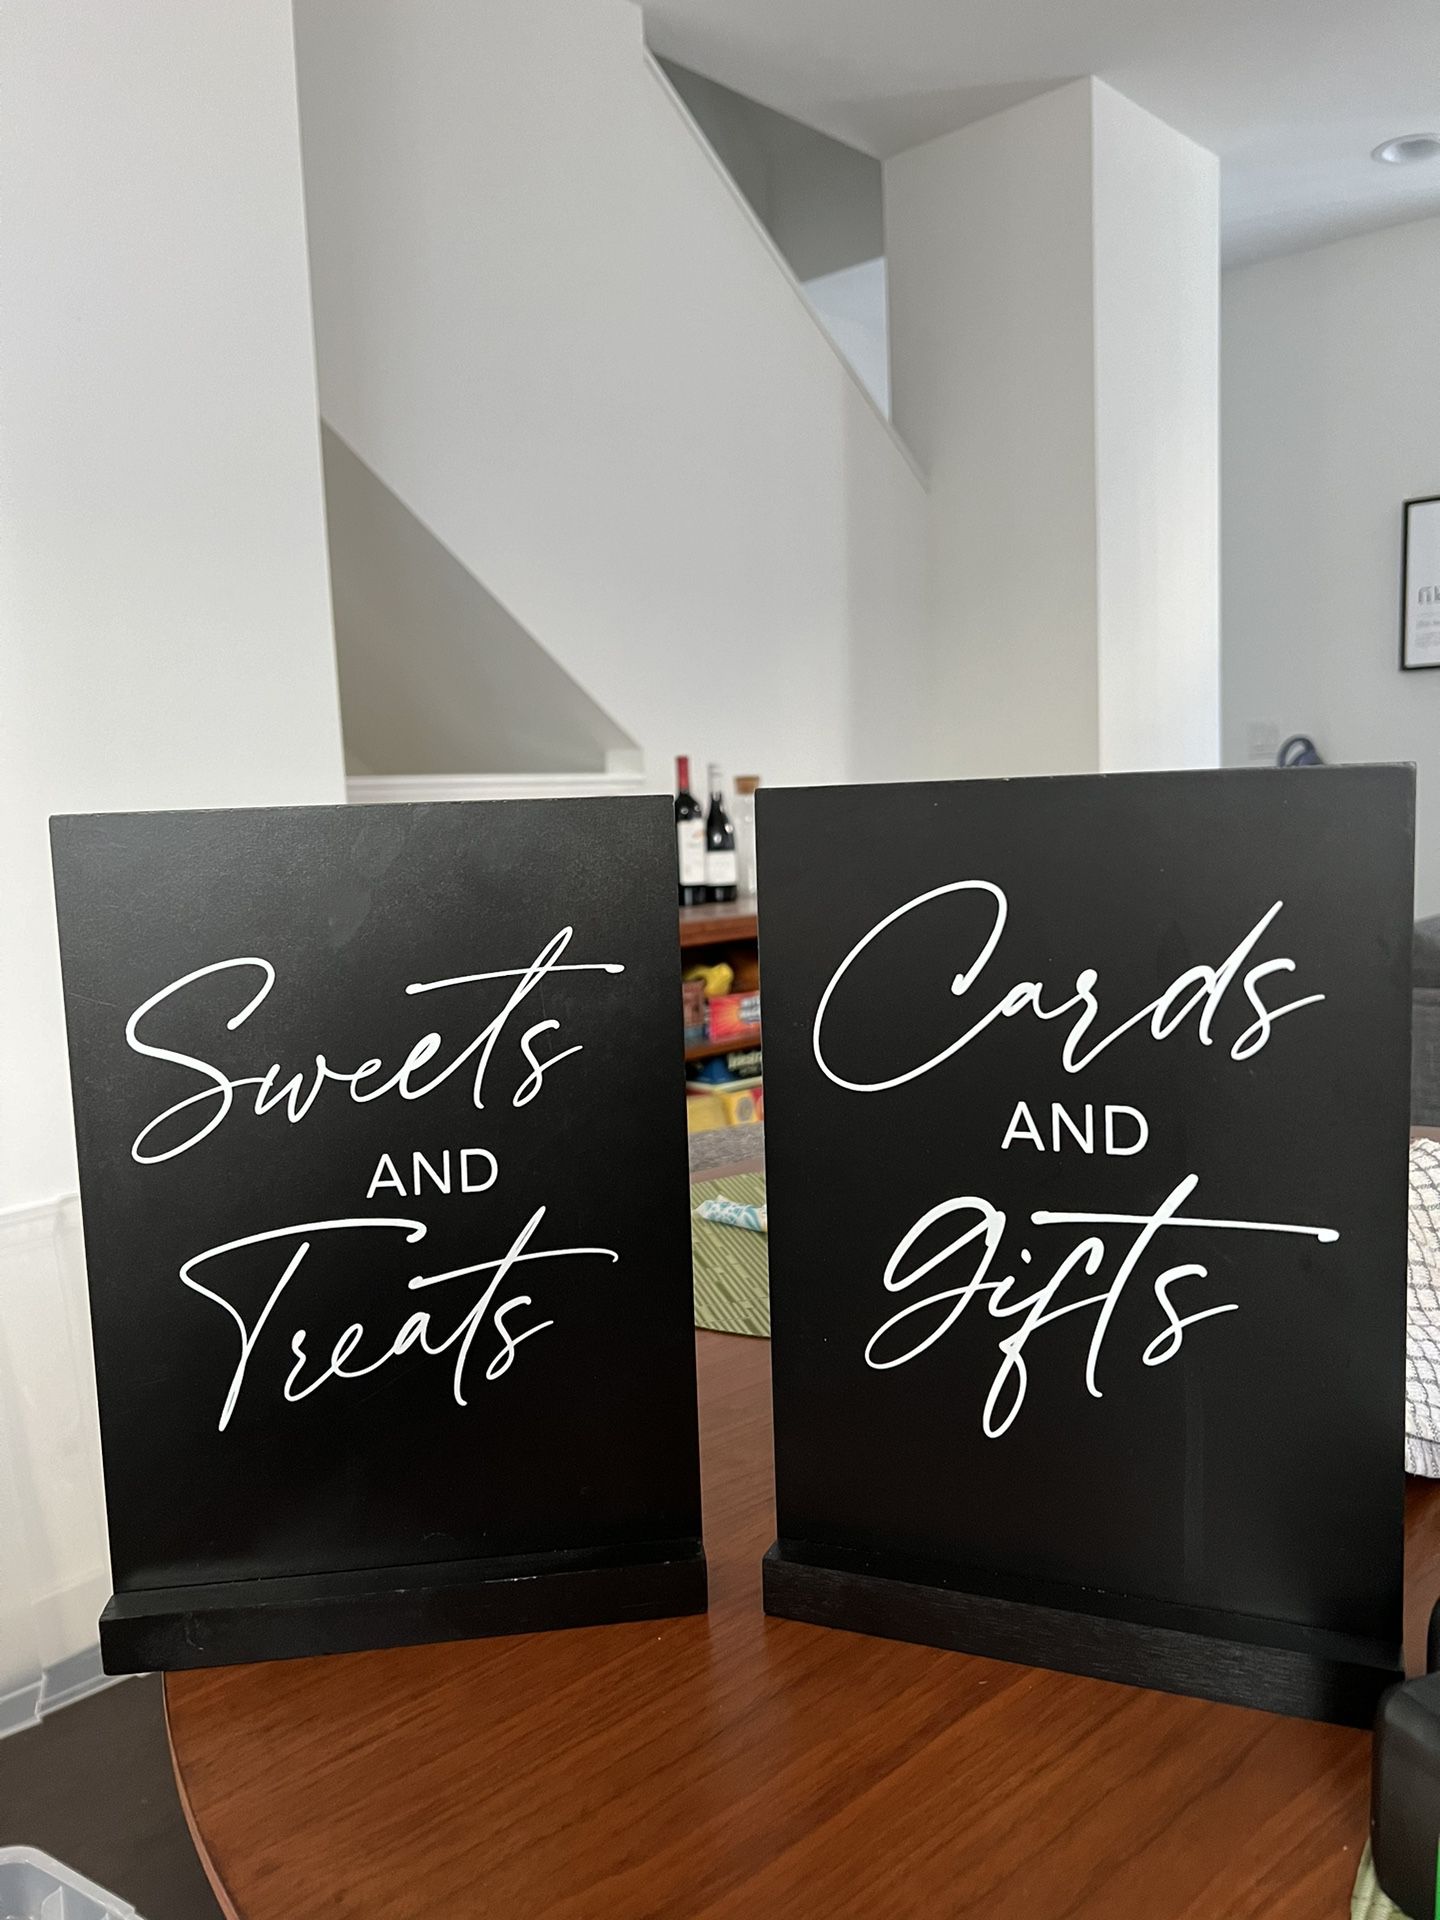 Wedding Sign: Sweets / Treats + Cards/Gifts